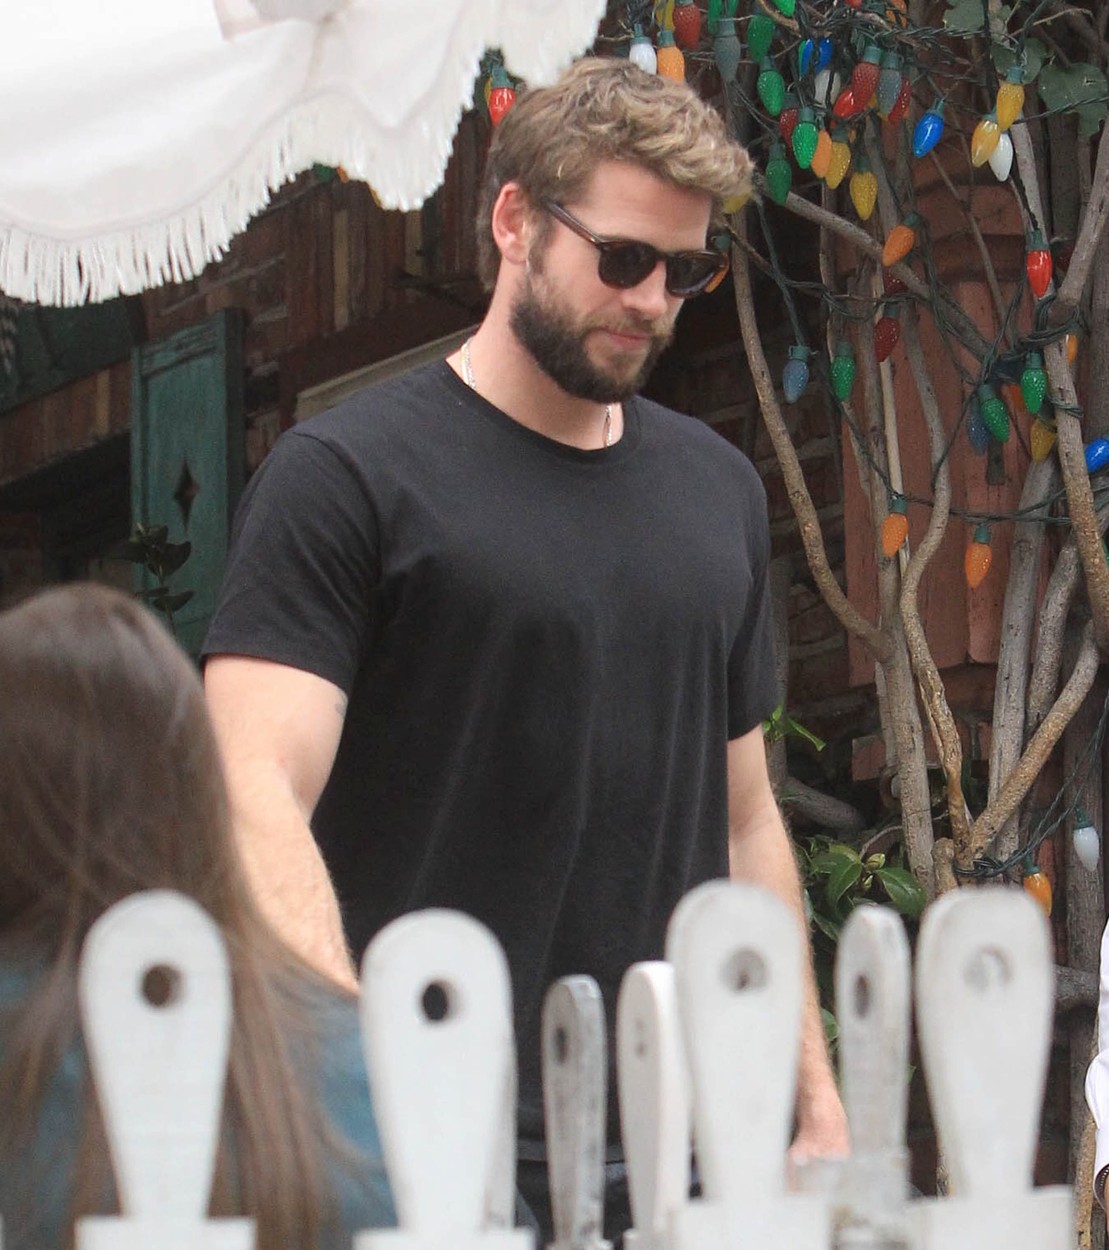 Liam Hemsworth
Liam Hemsworth out and about, Los Angeles, USA - 27 Feb 2020, Image: 501698292, License: Rights-managed, Restrictions: , Model Release: no, Credit line: RSMX/starmaxinc.com / Shutterstock Editorial / Profimedia